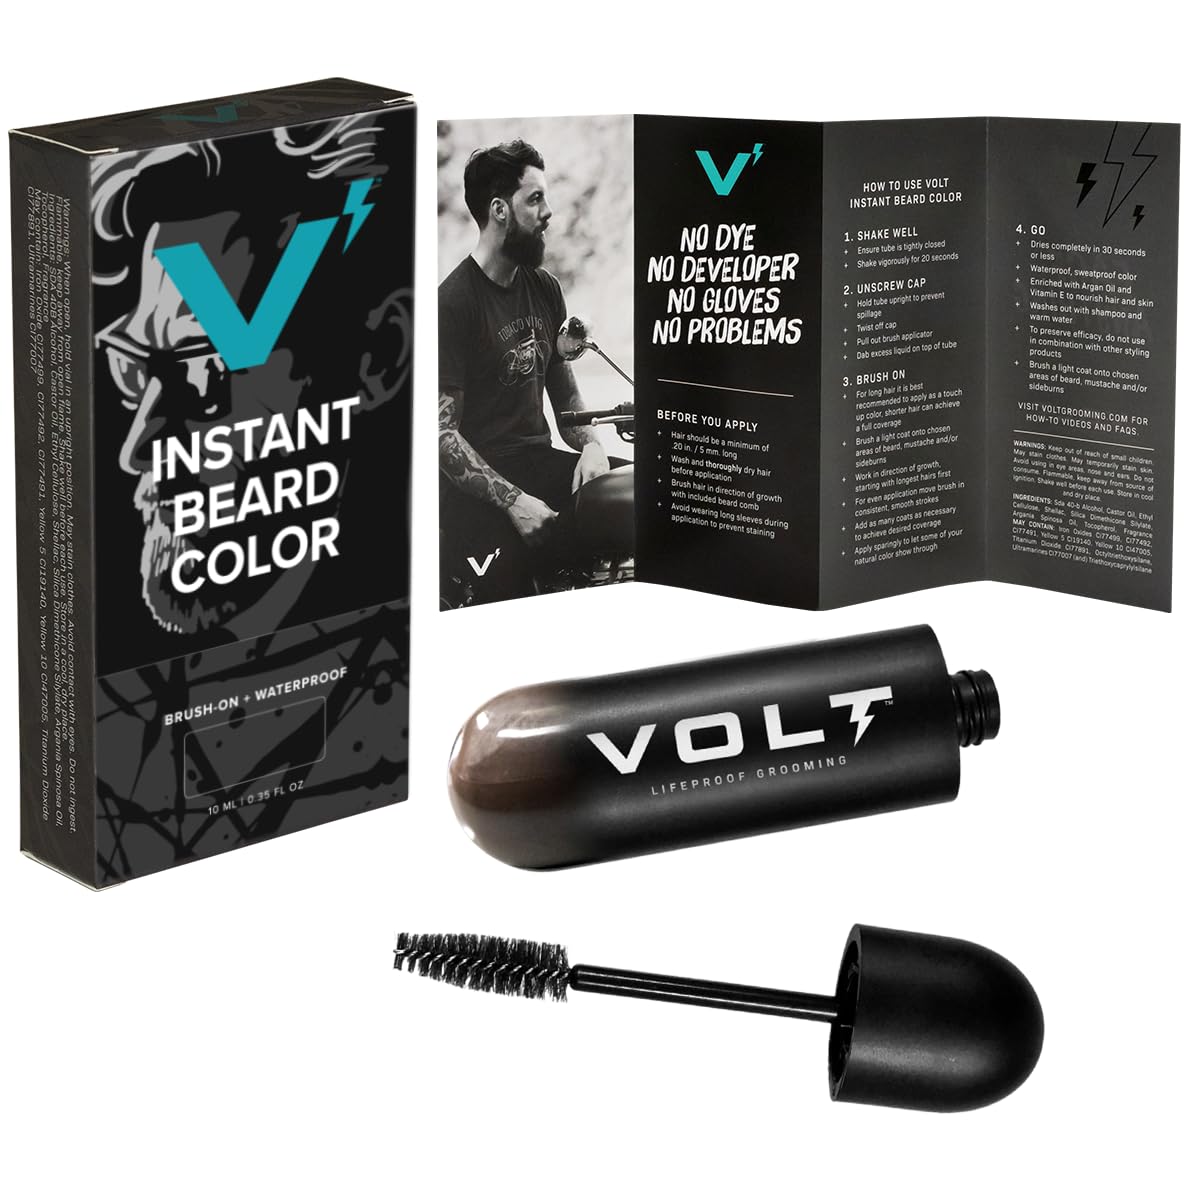 VOLT Grooming Instant Beard Color Single Pack - Smudge and Water Resistant Quick Drying Brush on Color for Beards, Mustaches, and Eyebrows - 0.35 Fl Oz (10 ml), Ebony (Brown/Black)